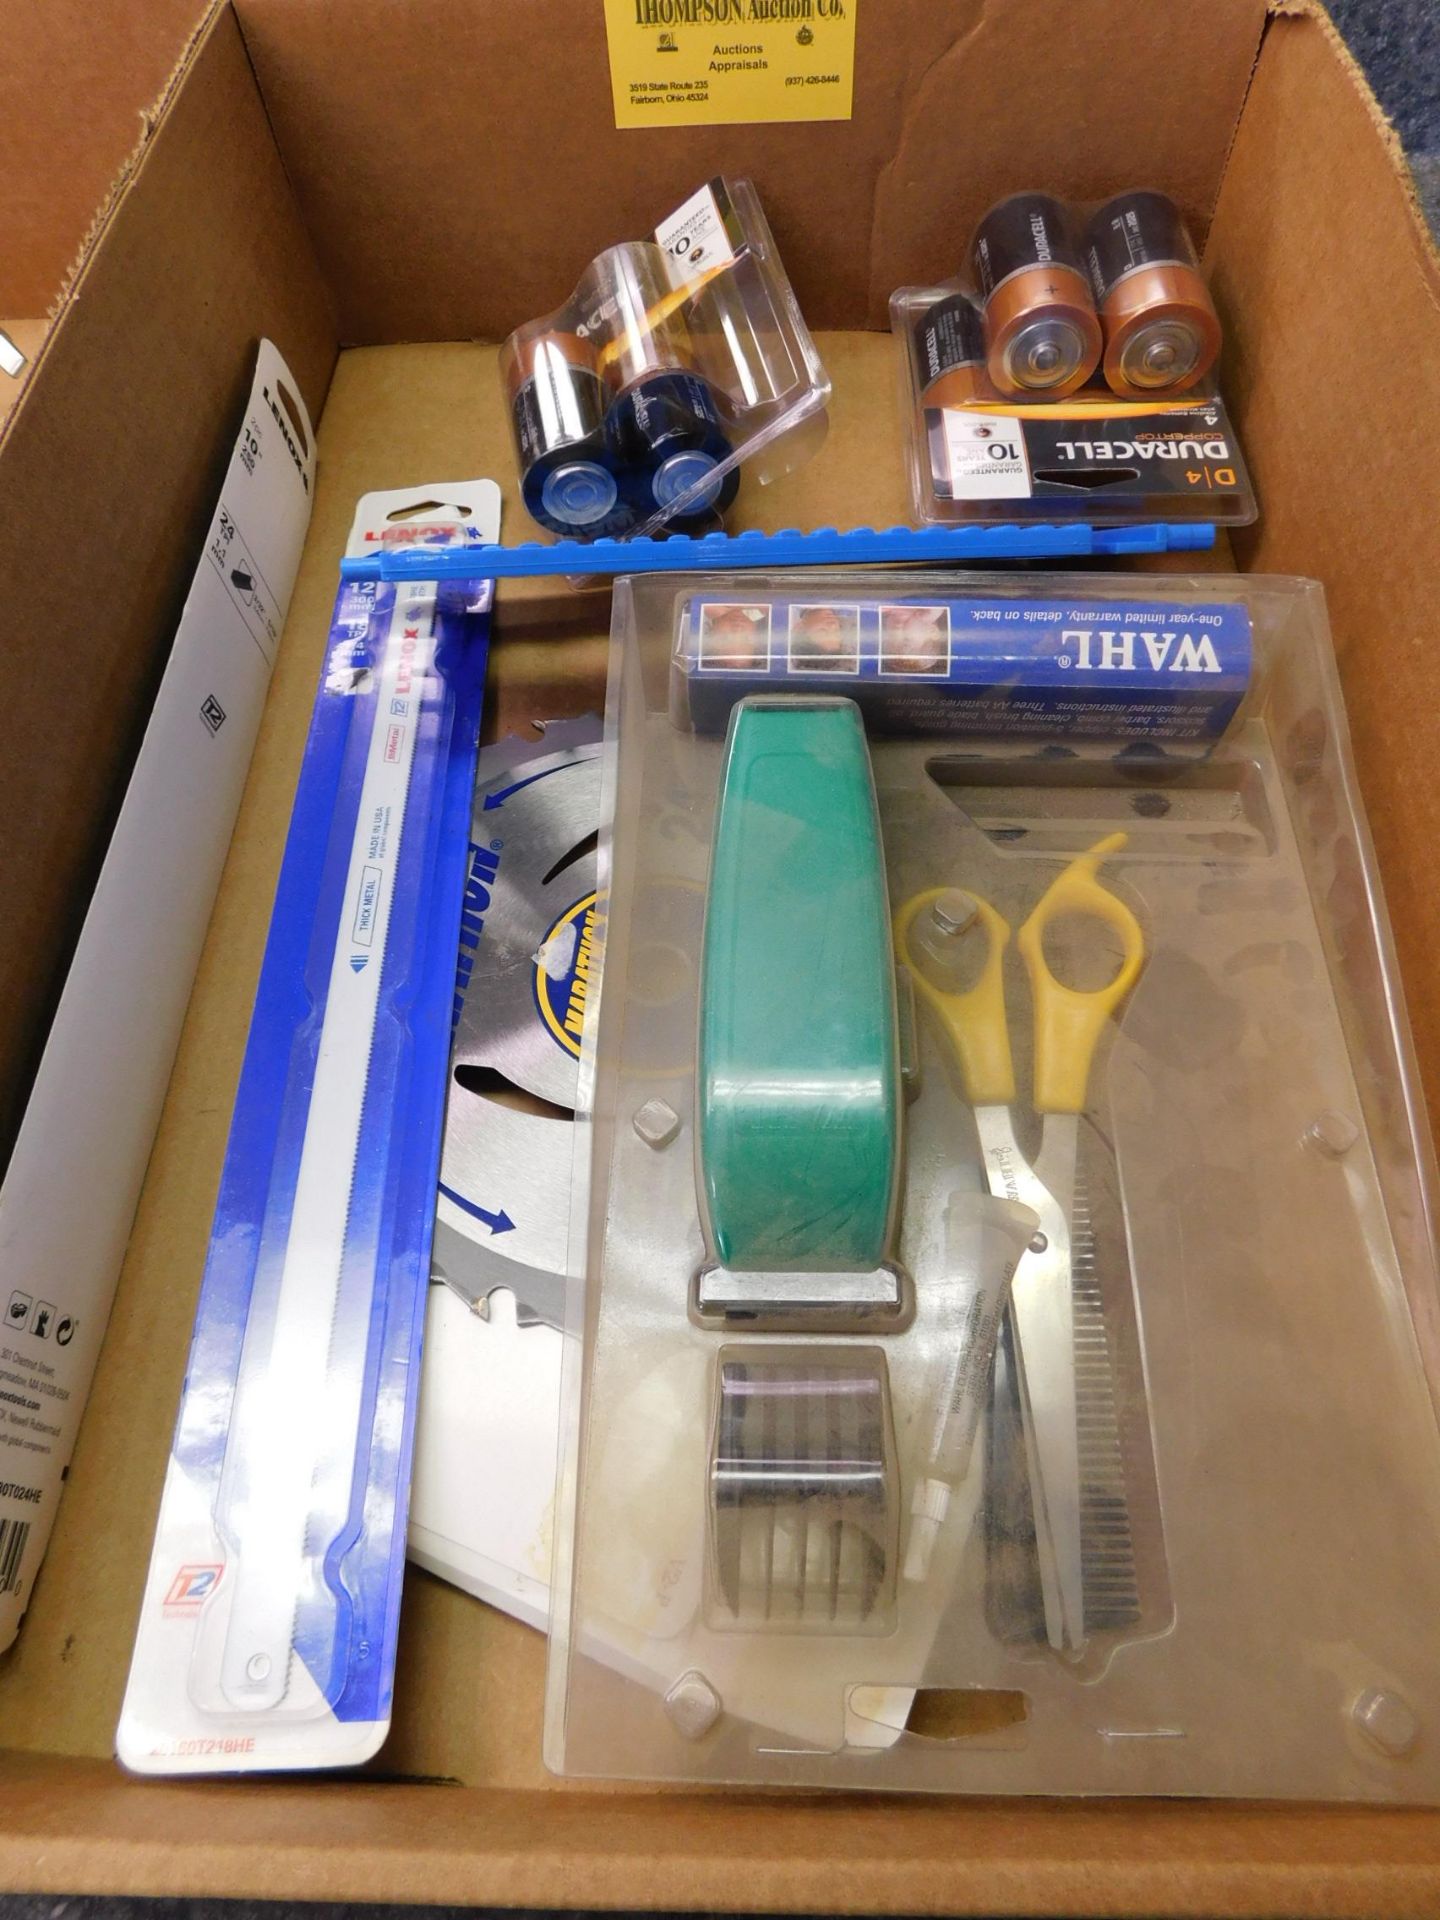 Batteries, Saw Blades & Wahl Hair Clippers